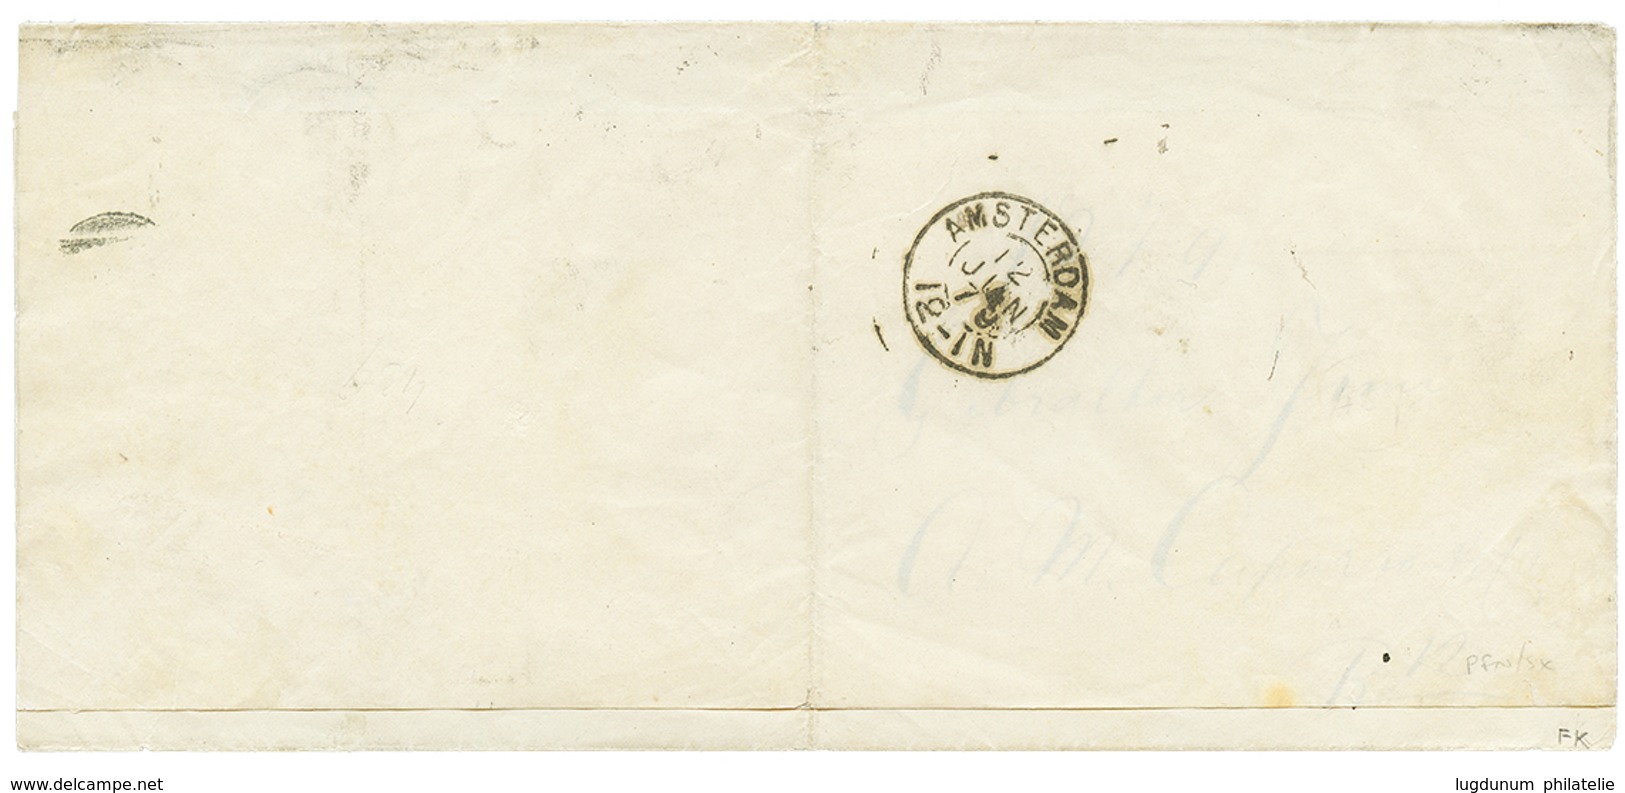 1879 GB 1/2d Canc. A26 + GIBRALTAR On Cover (PRINTED MATTER) To AMSTERDAM (HOLLAND). Scarce. Vvf. - Gibraltar